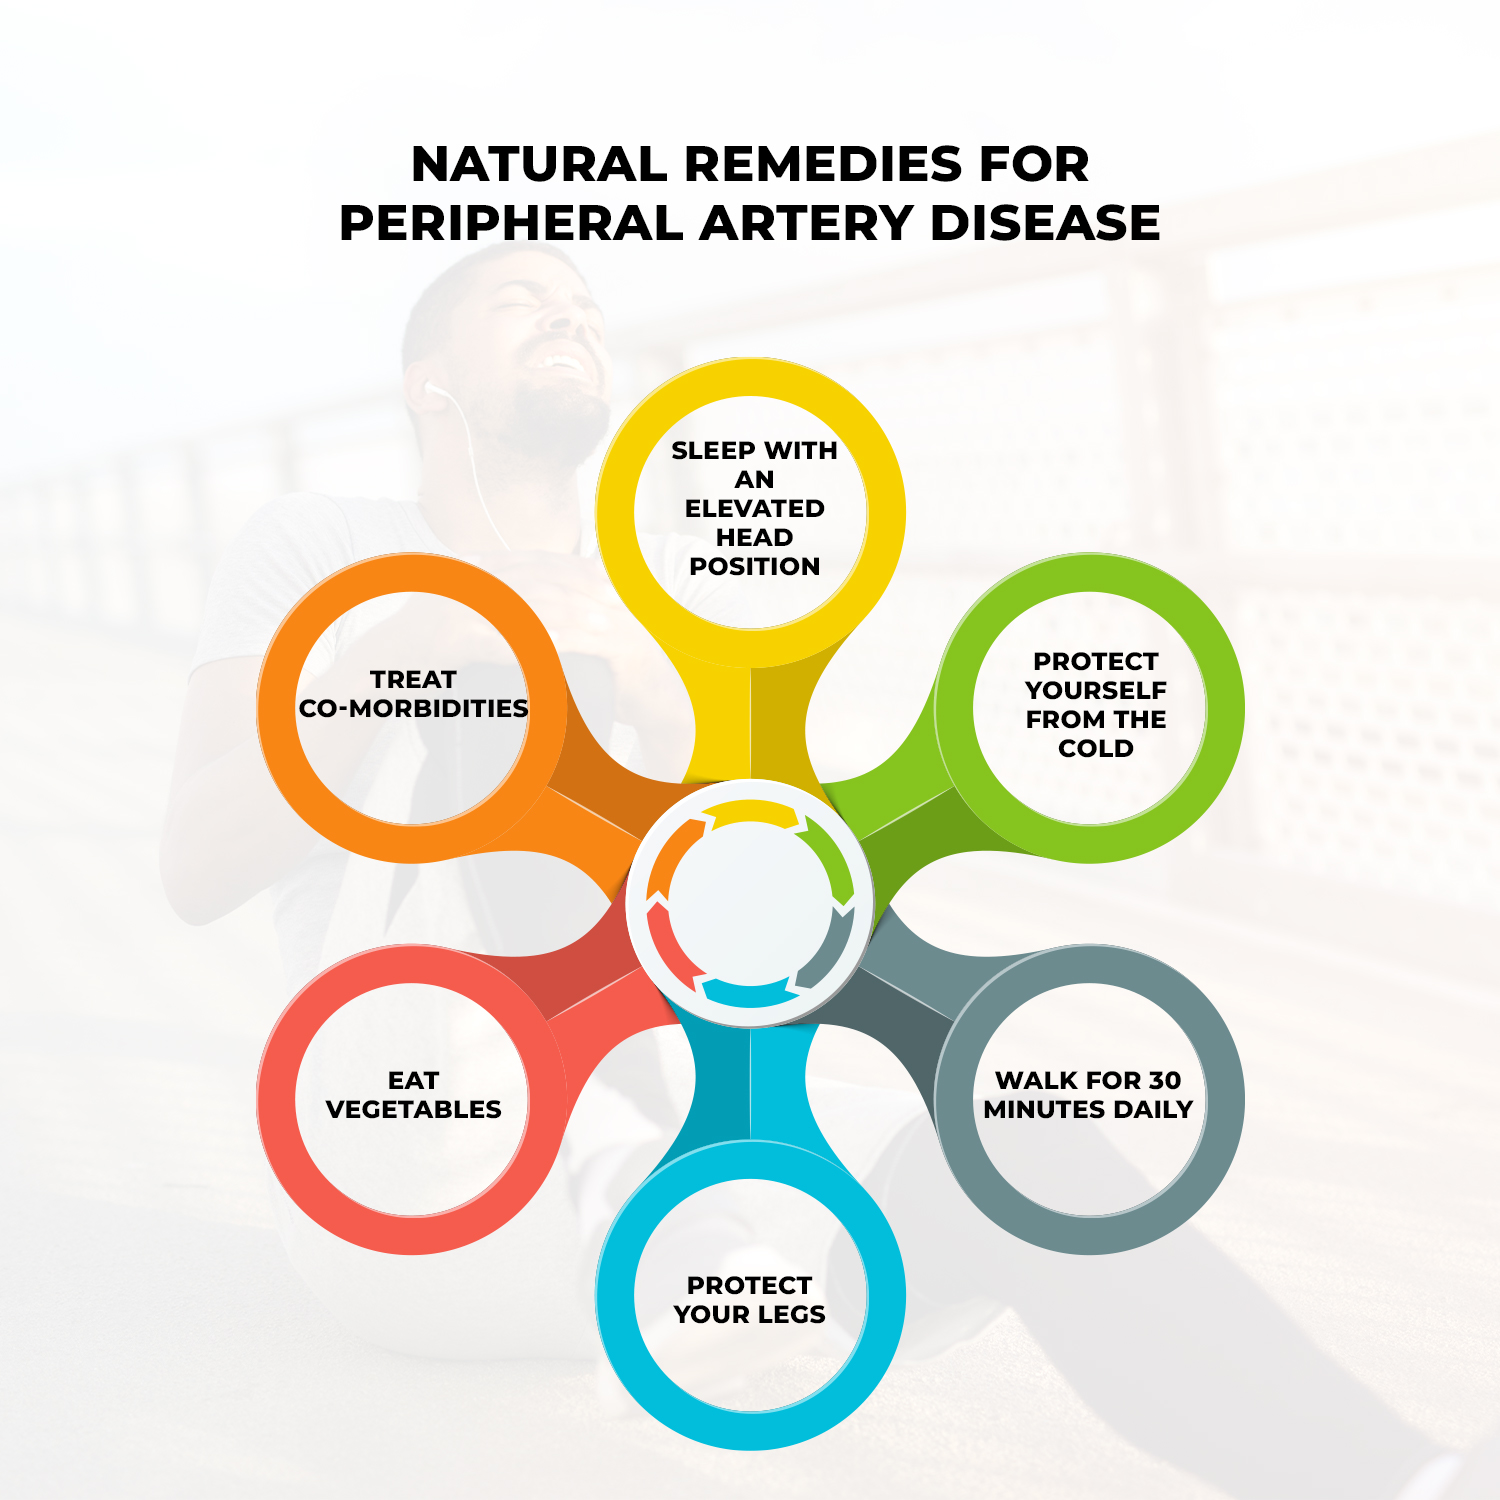 7 Best Natural Remedies For Peripheral Artery Disease